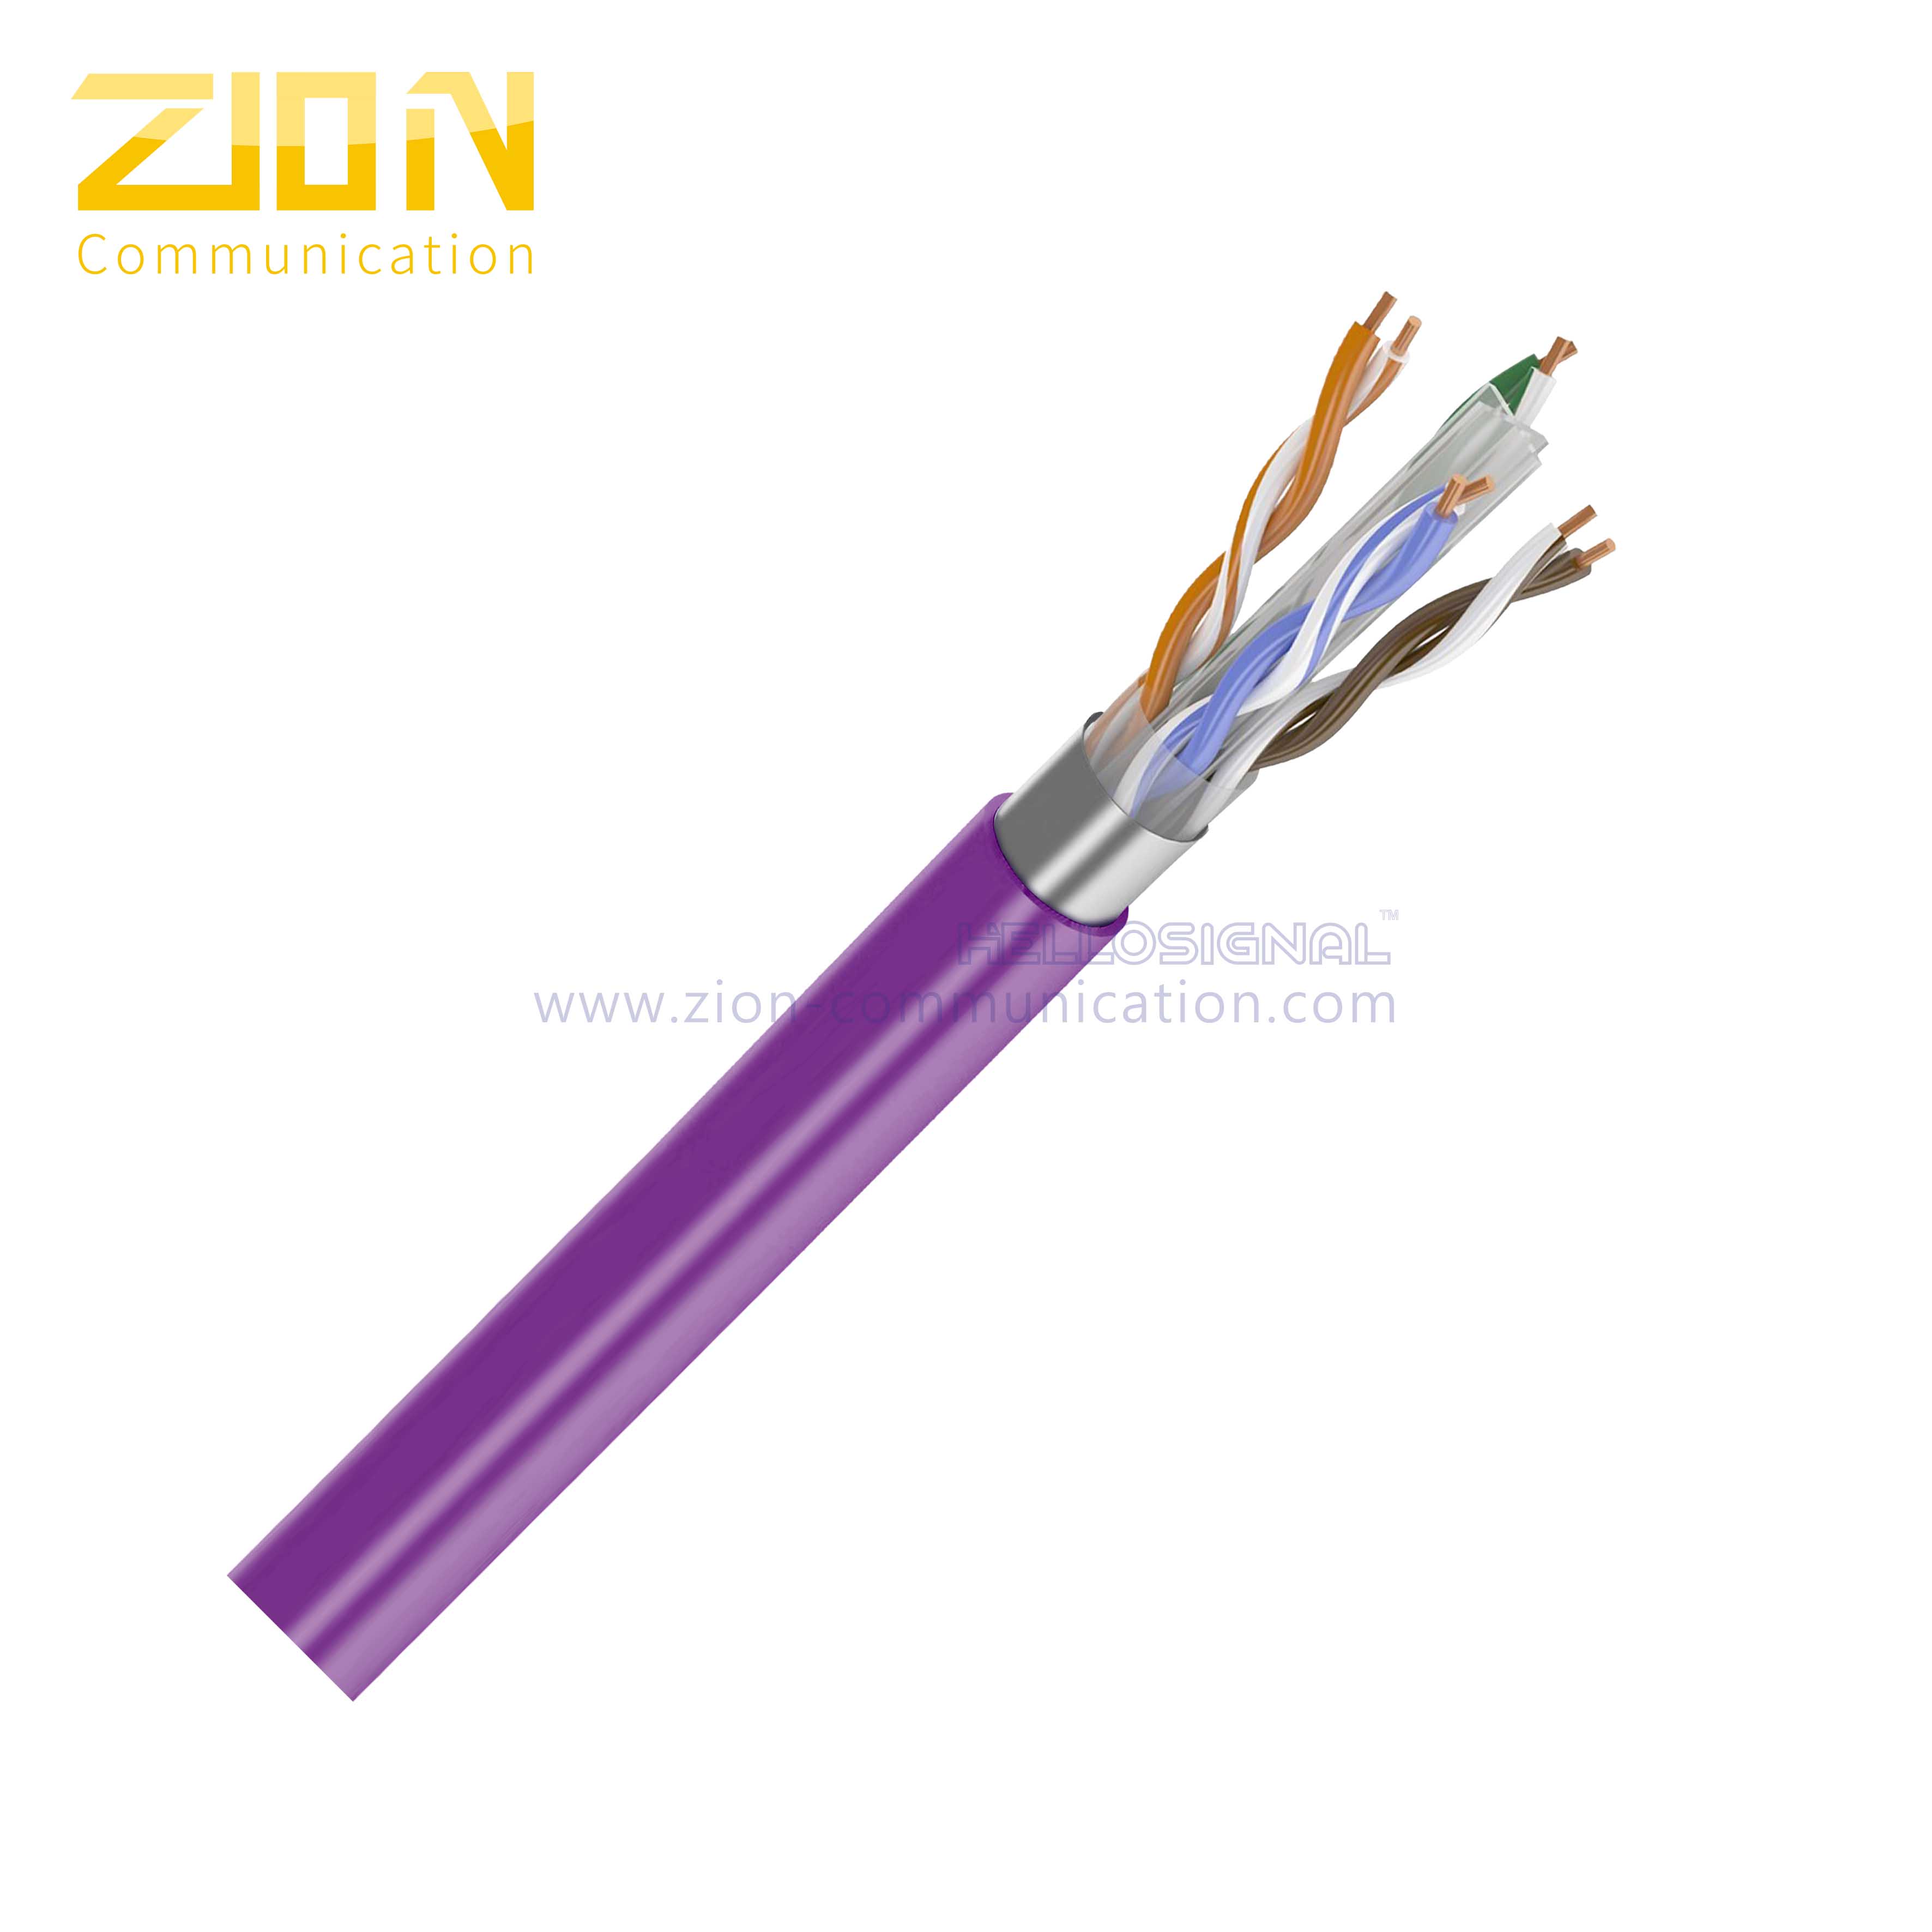 F Utp Cat6 4pr 23awg Pvc Cmr Ethernet Network Cable From China Manufacturer Zion Communication